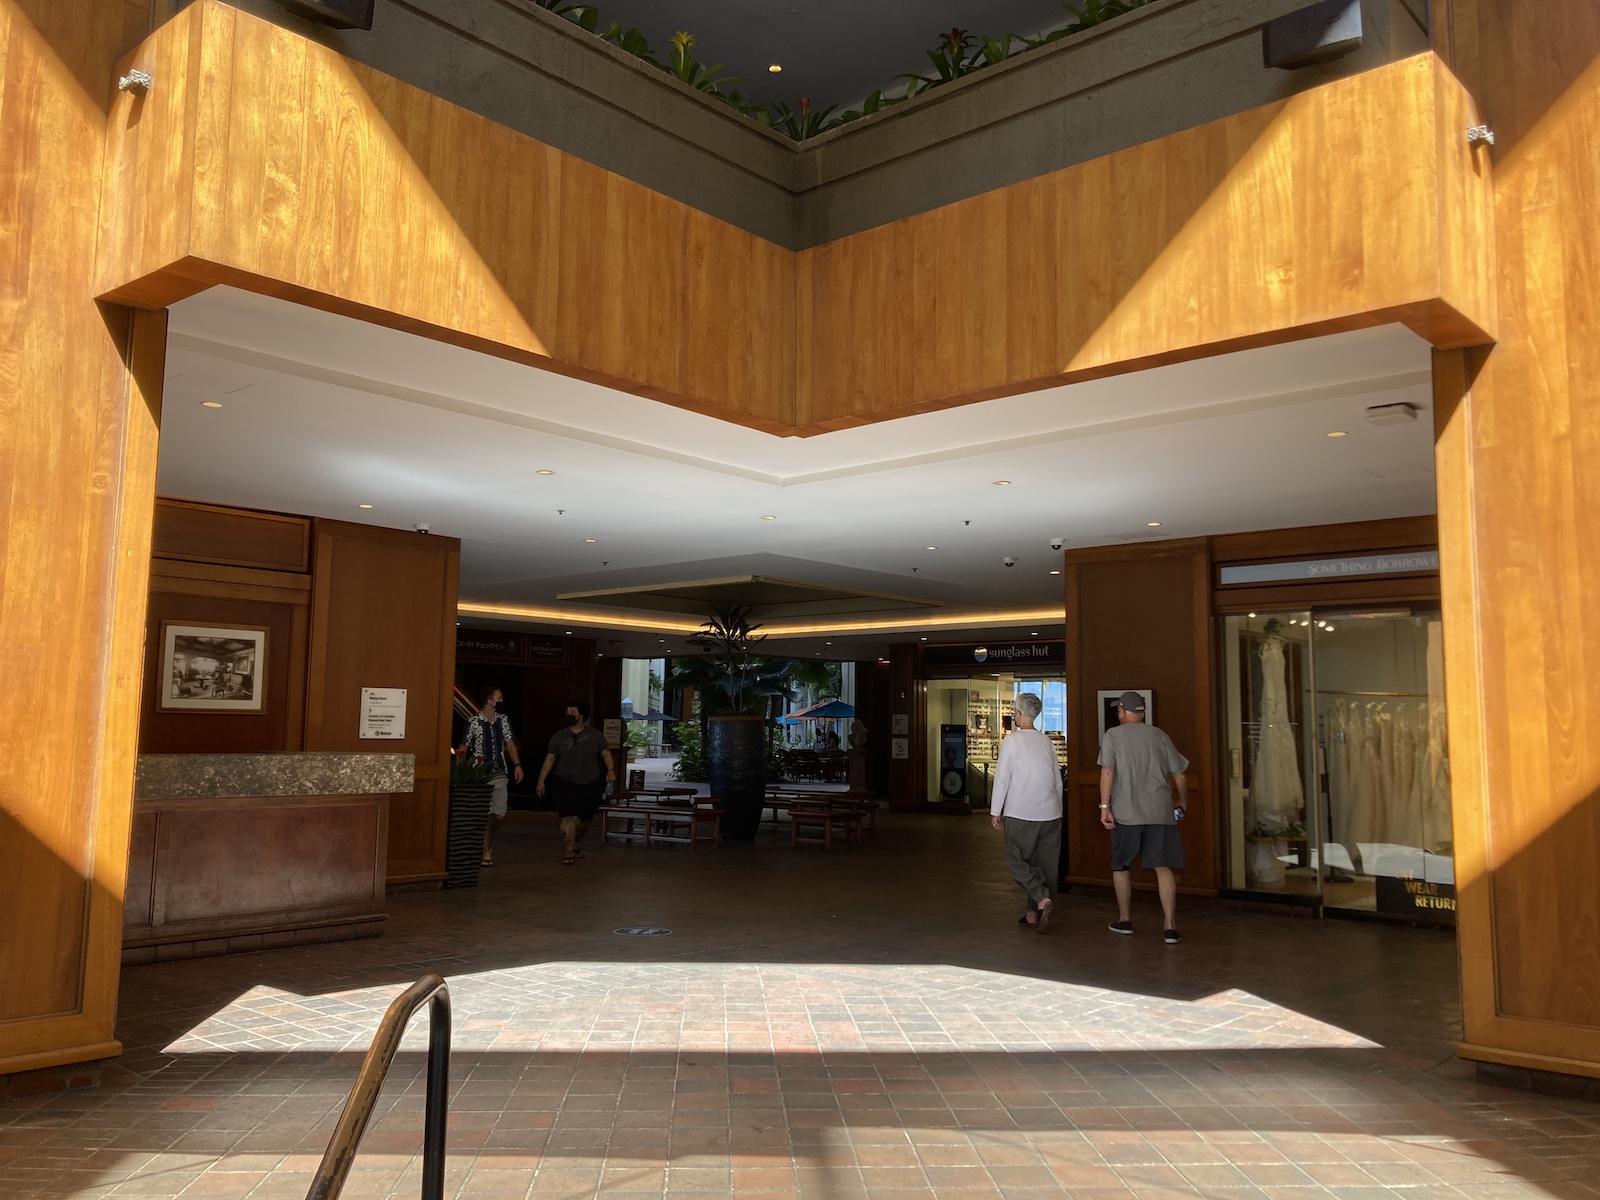 View of main entrance to Hyatt Regency Waikiki with people coming toward the exit